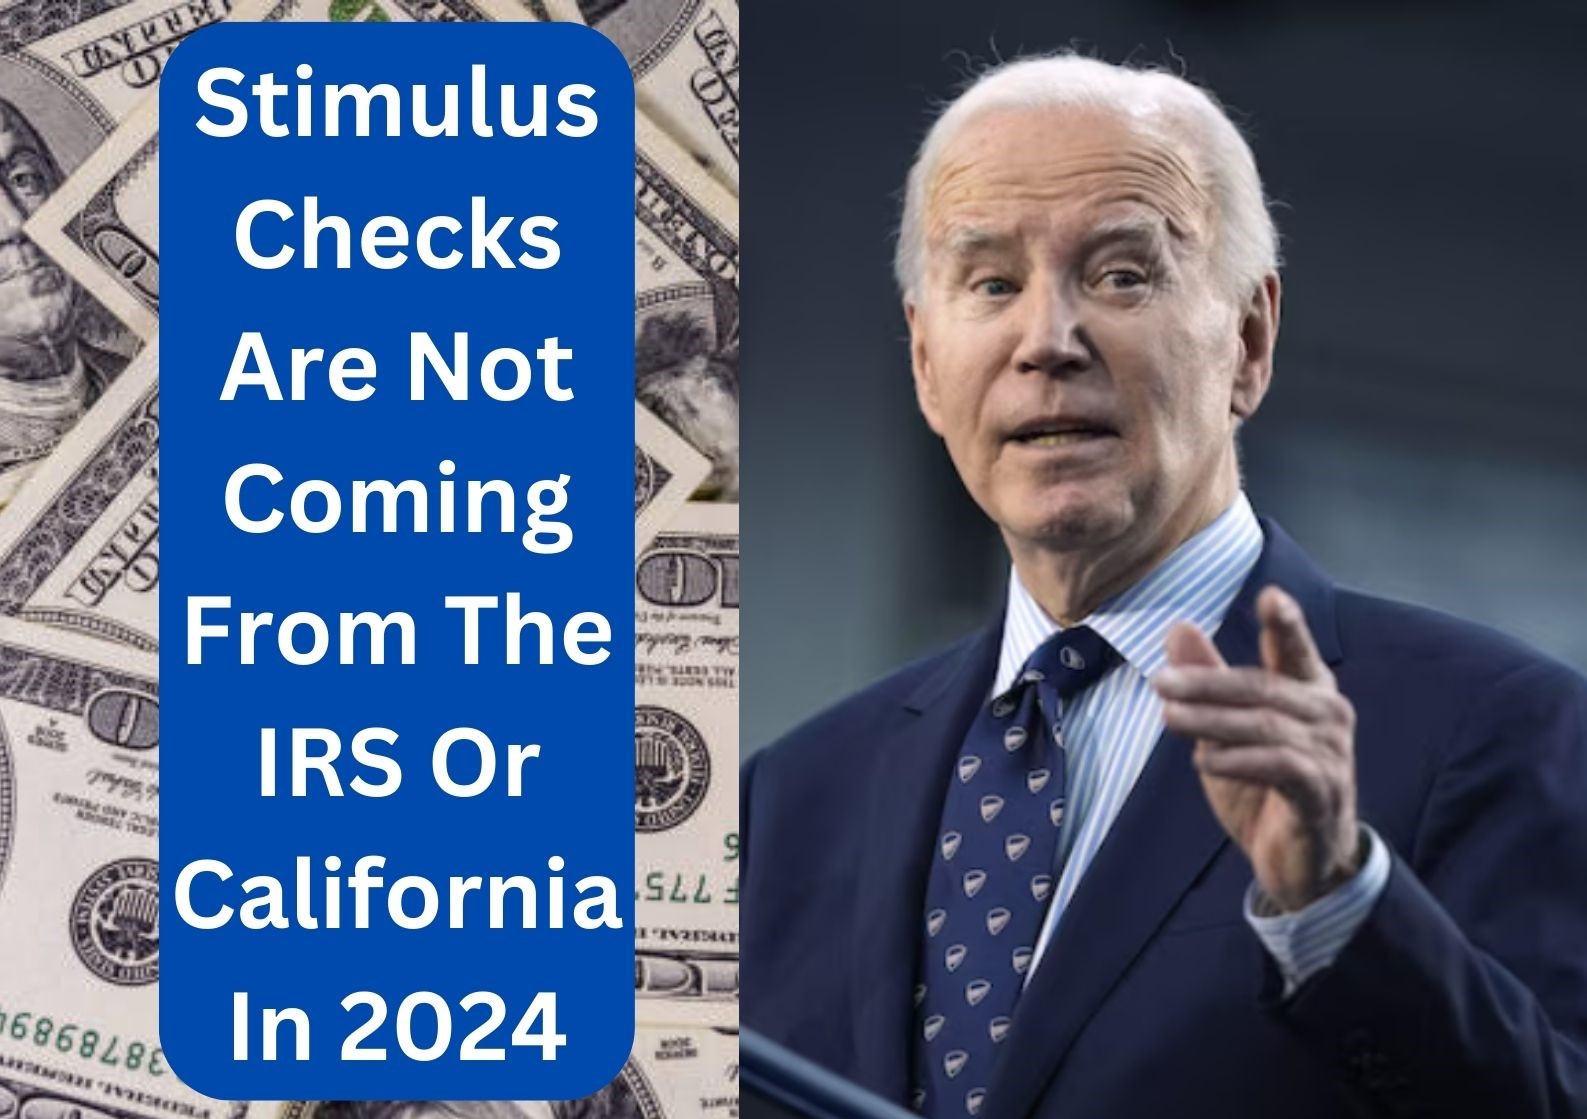 No, Stimulus Checks Are Not Coming From The IRS Or California In 2024